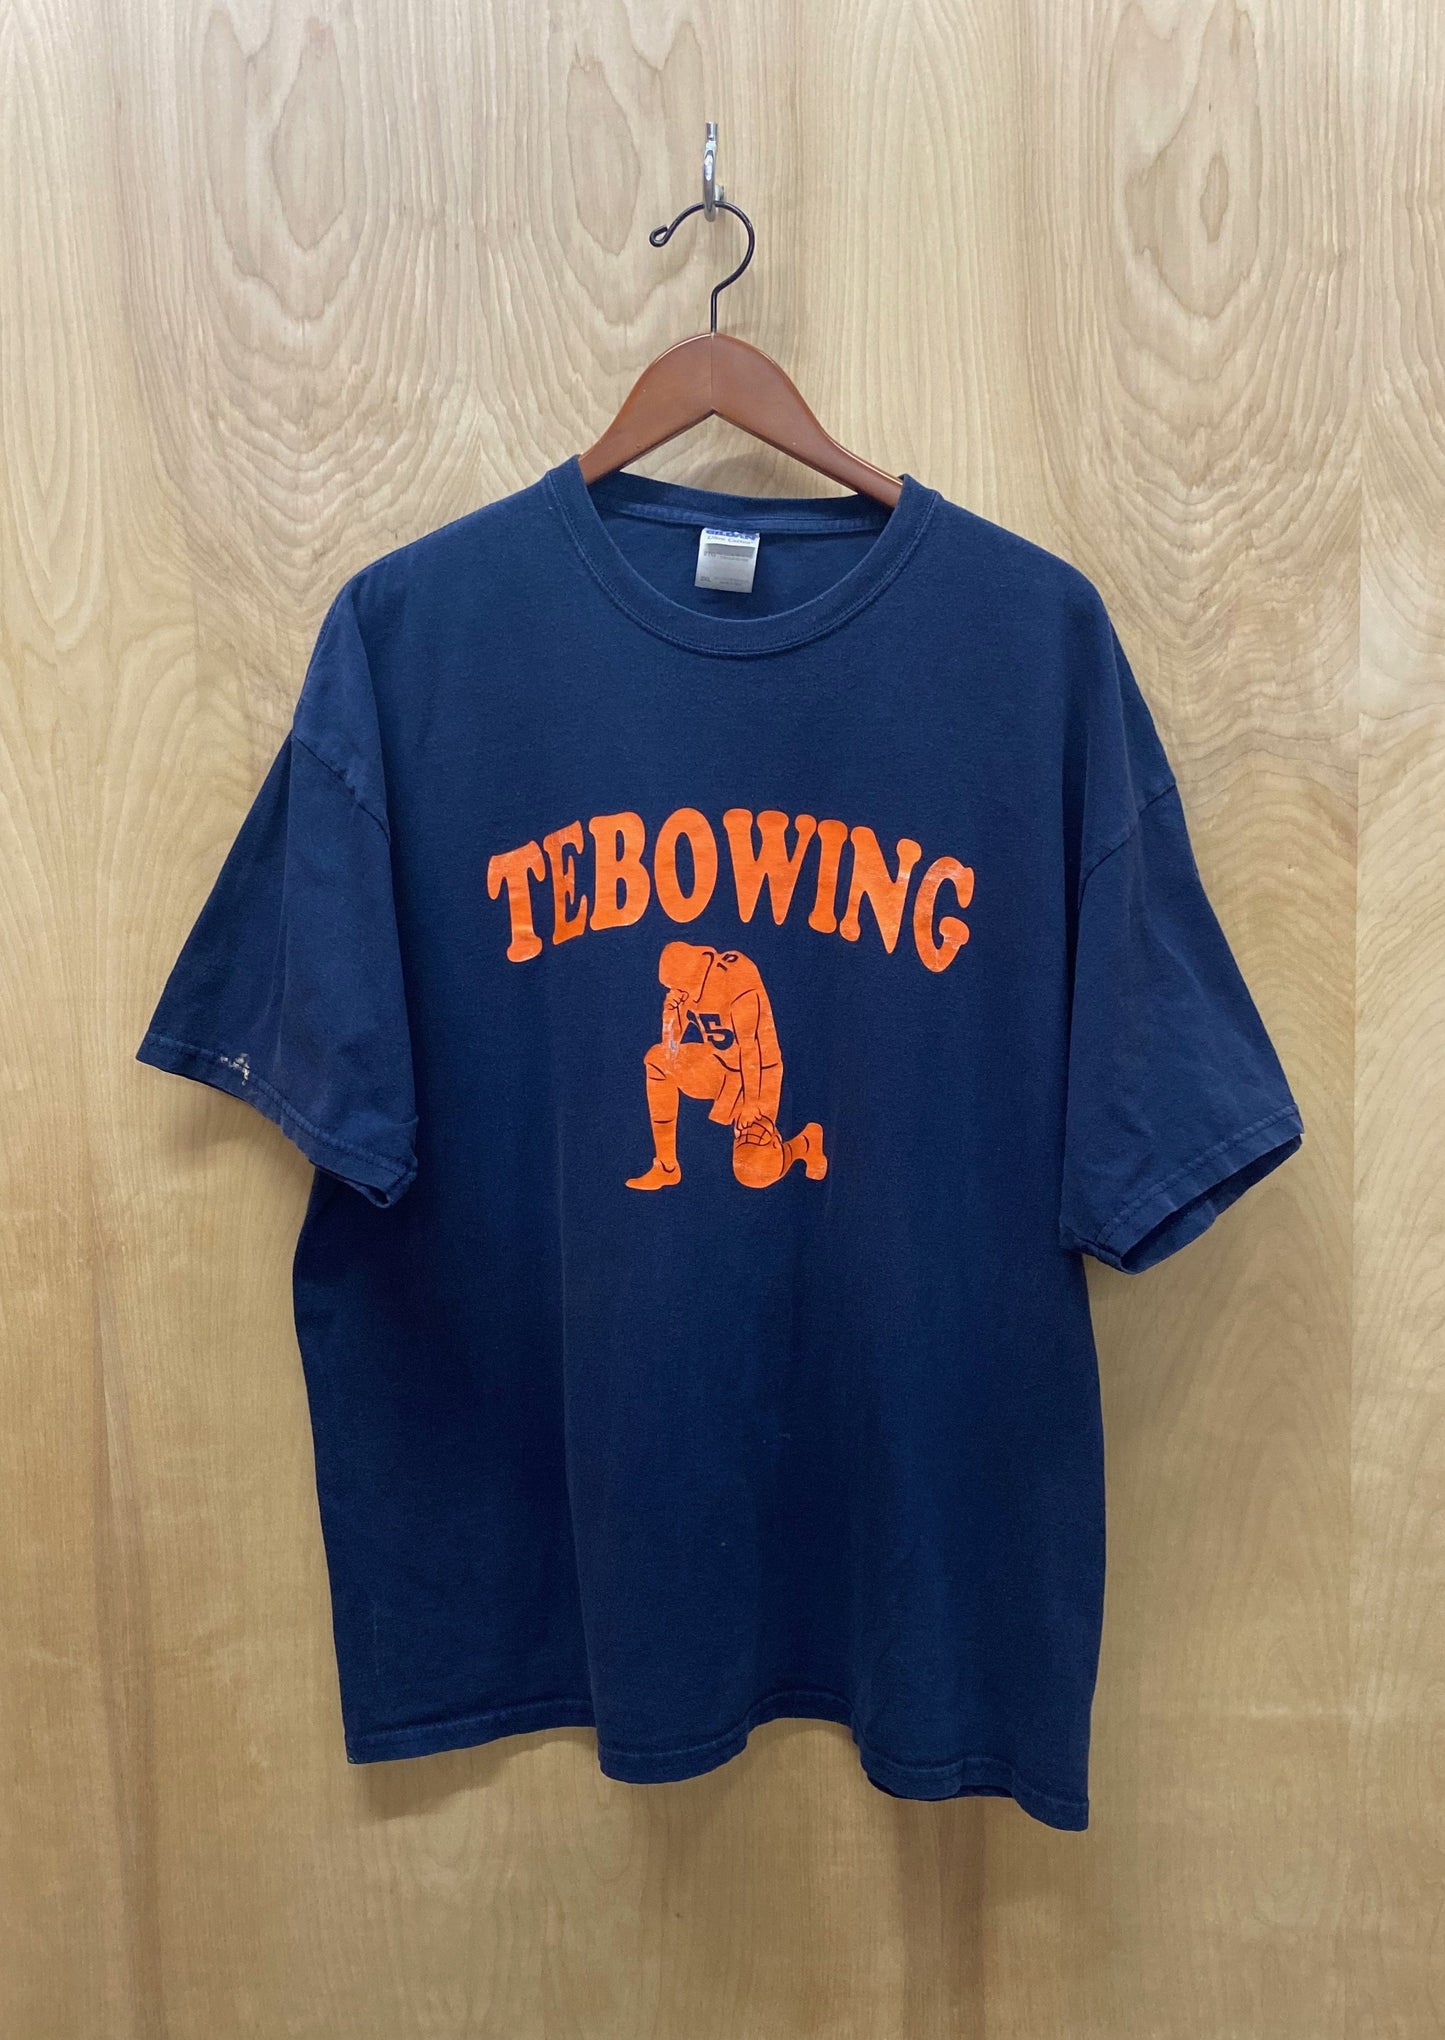 Tim Tebow "Tebowing" T-Shirt (6556853010512)